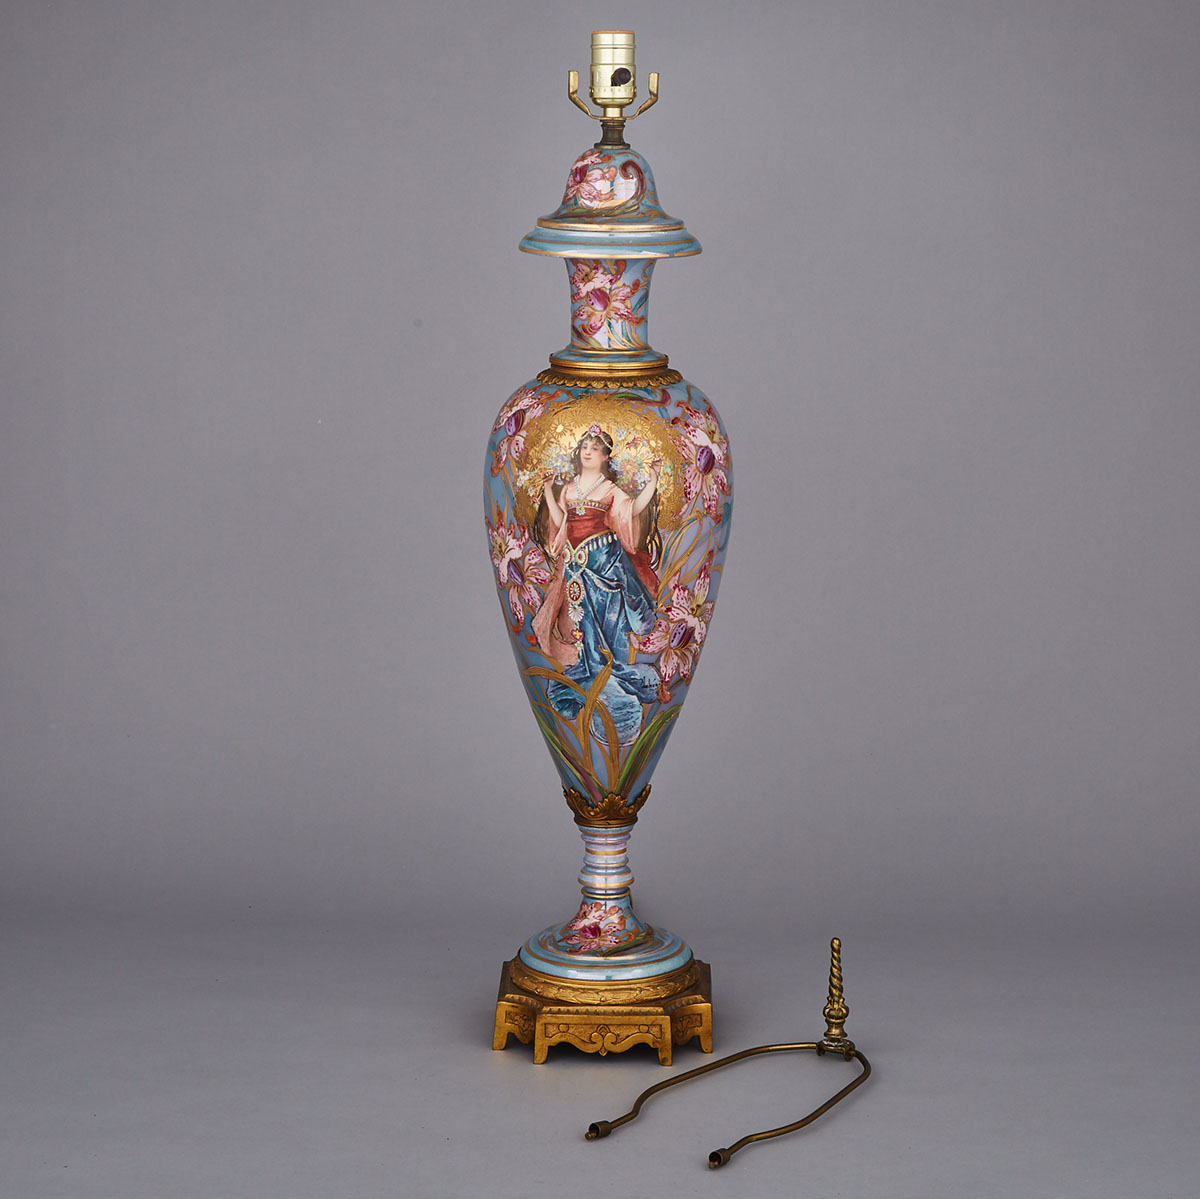 Ormolu Mounted ‘Sèvres’ Table Lamp, early 20th century